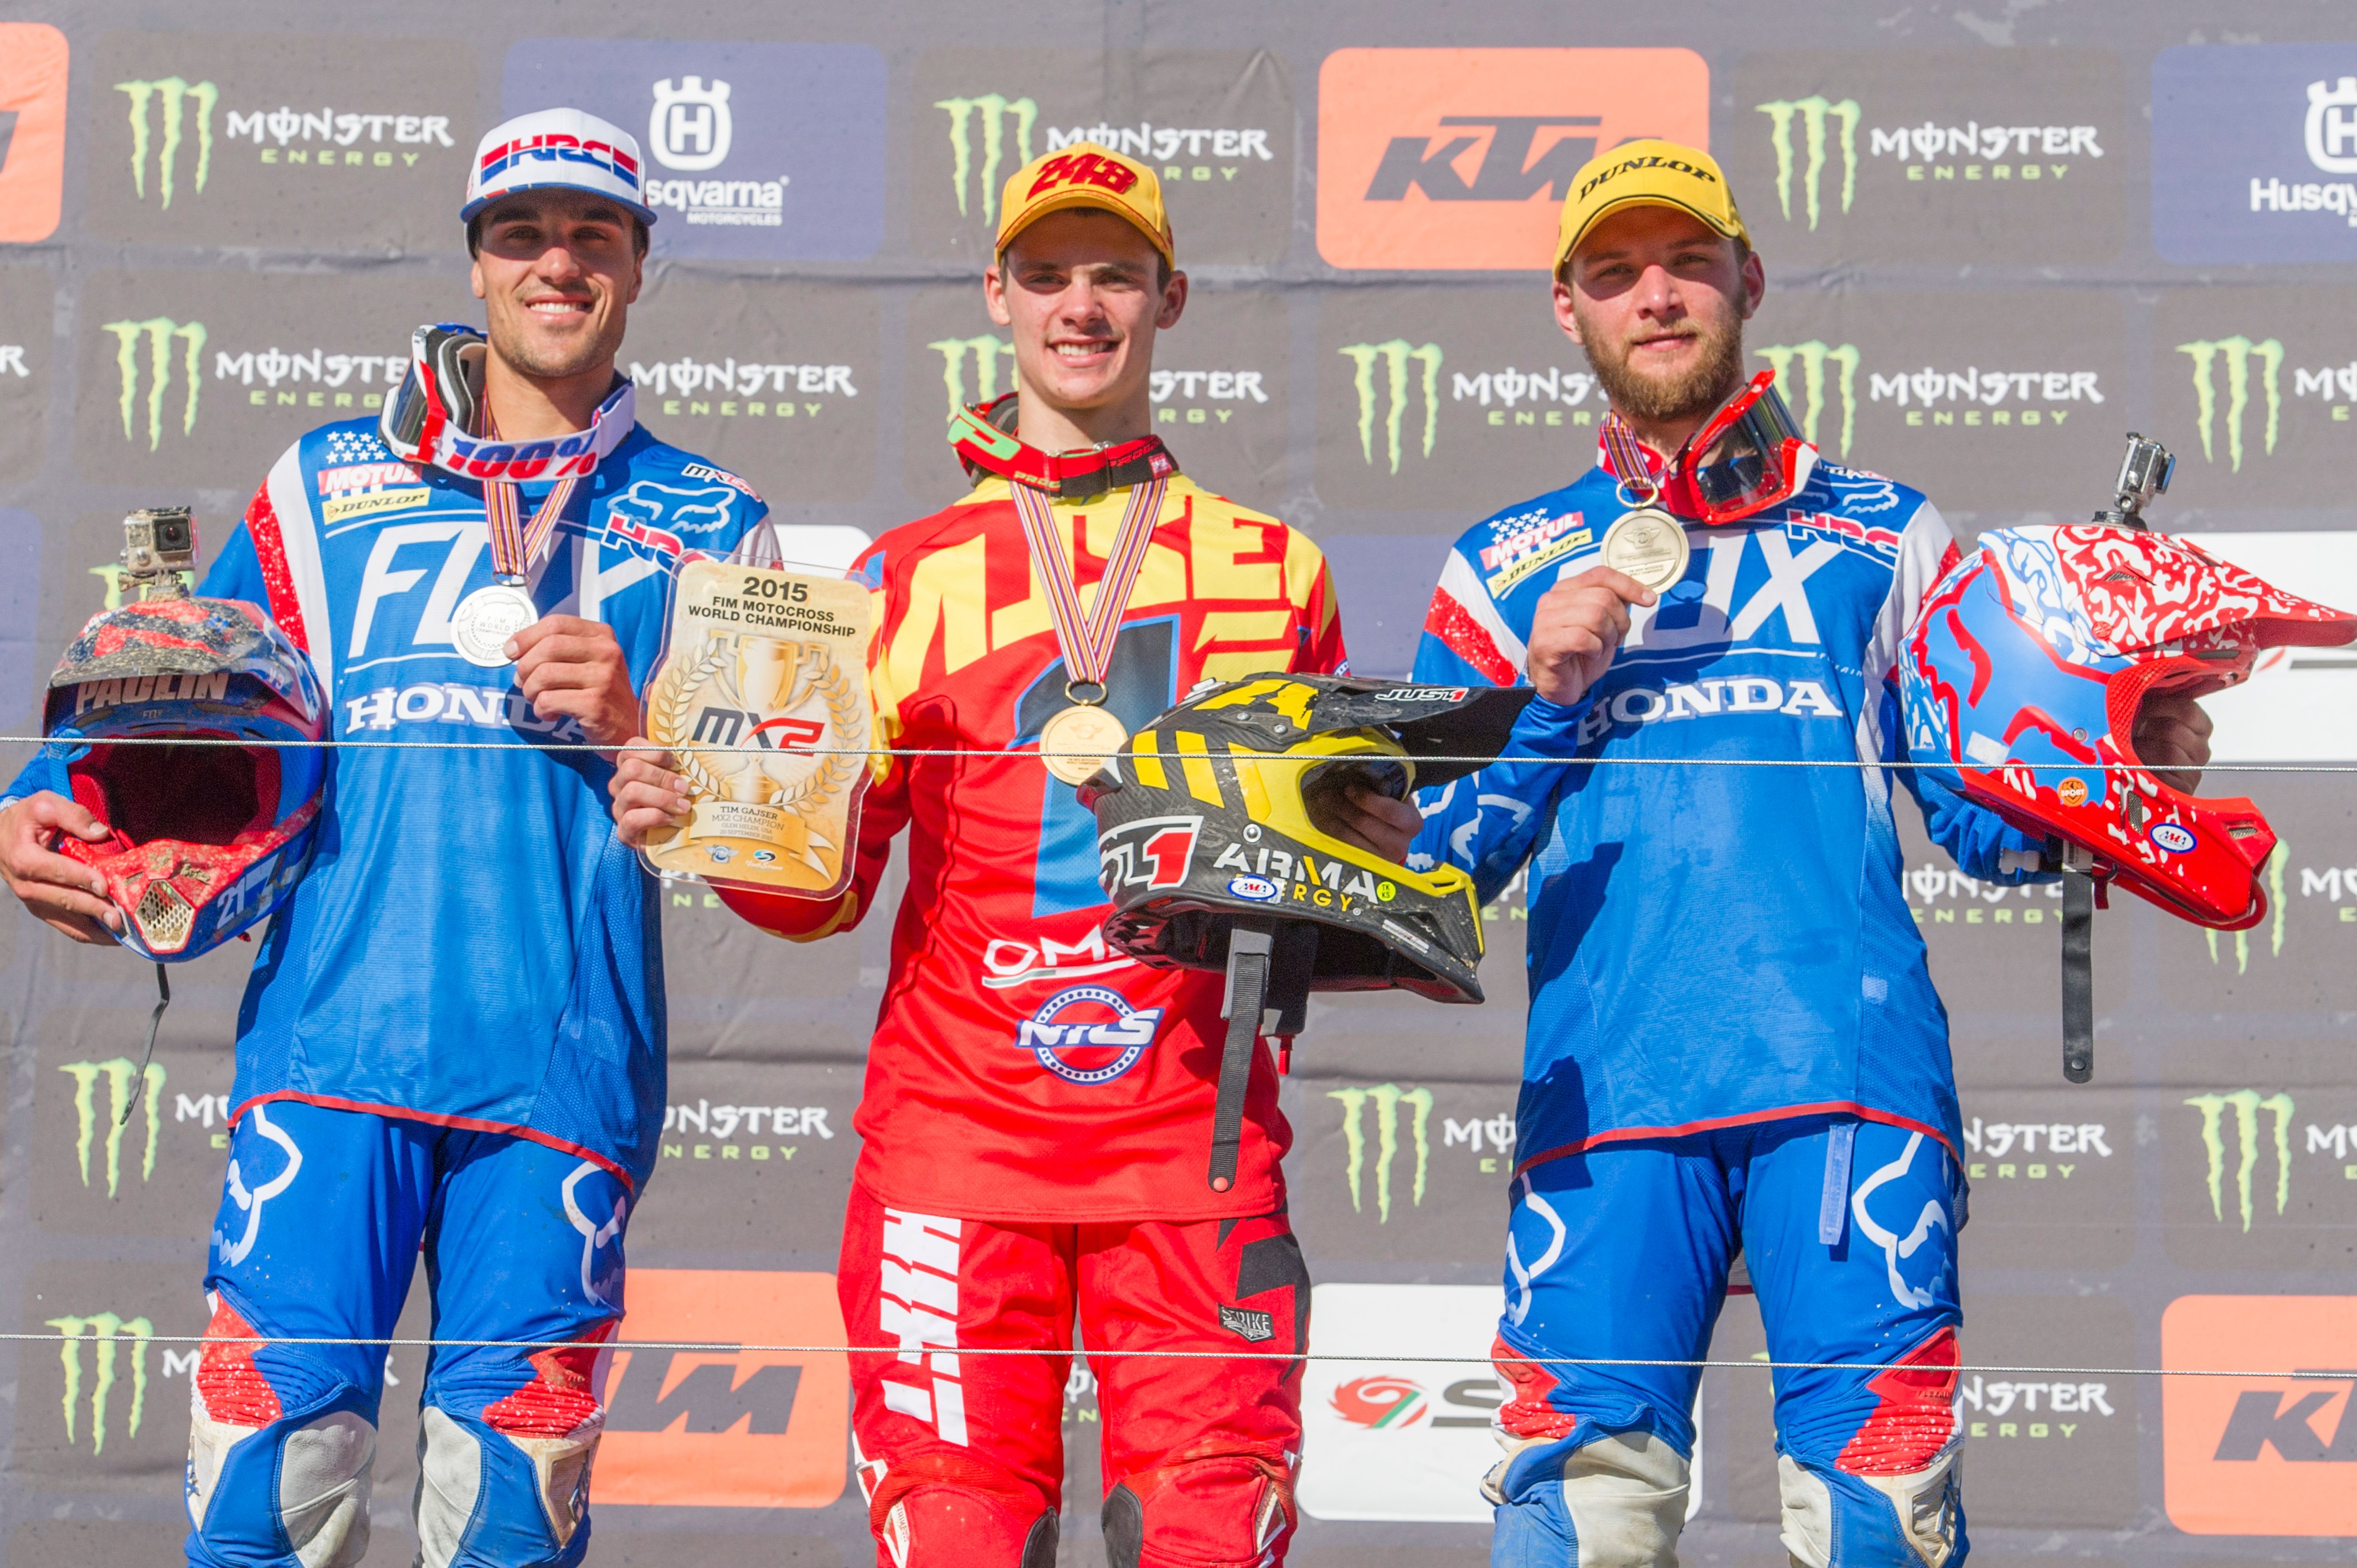 Tim Gajser (center) took 1st in MX2! Gautier Paulin (left) and Evgeny Bobryshev (right) are also Rekluse riders. Photo: HRC.